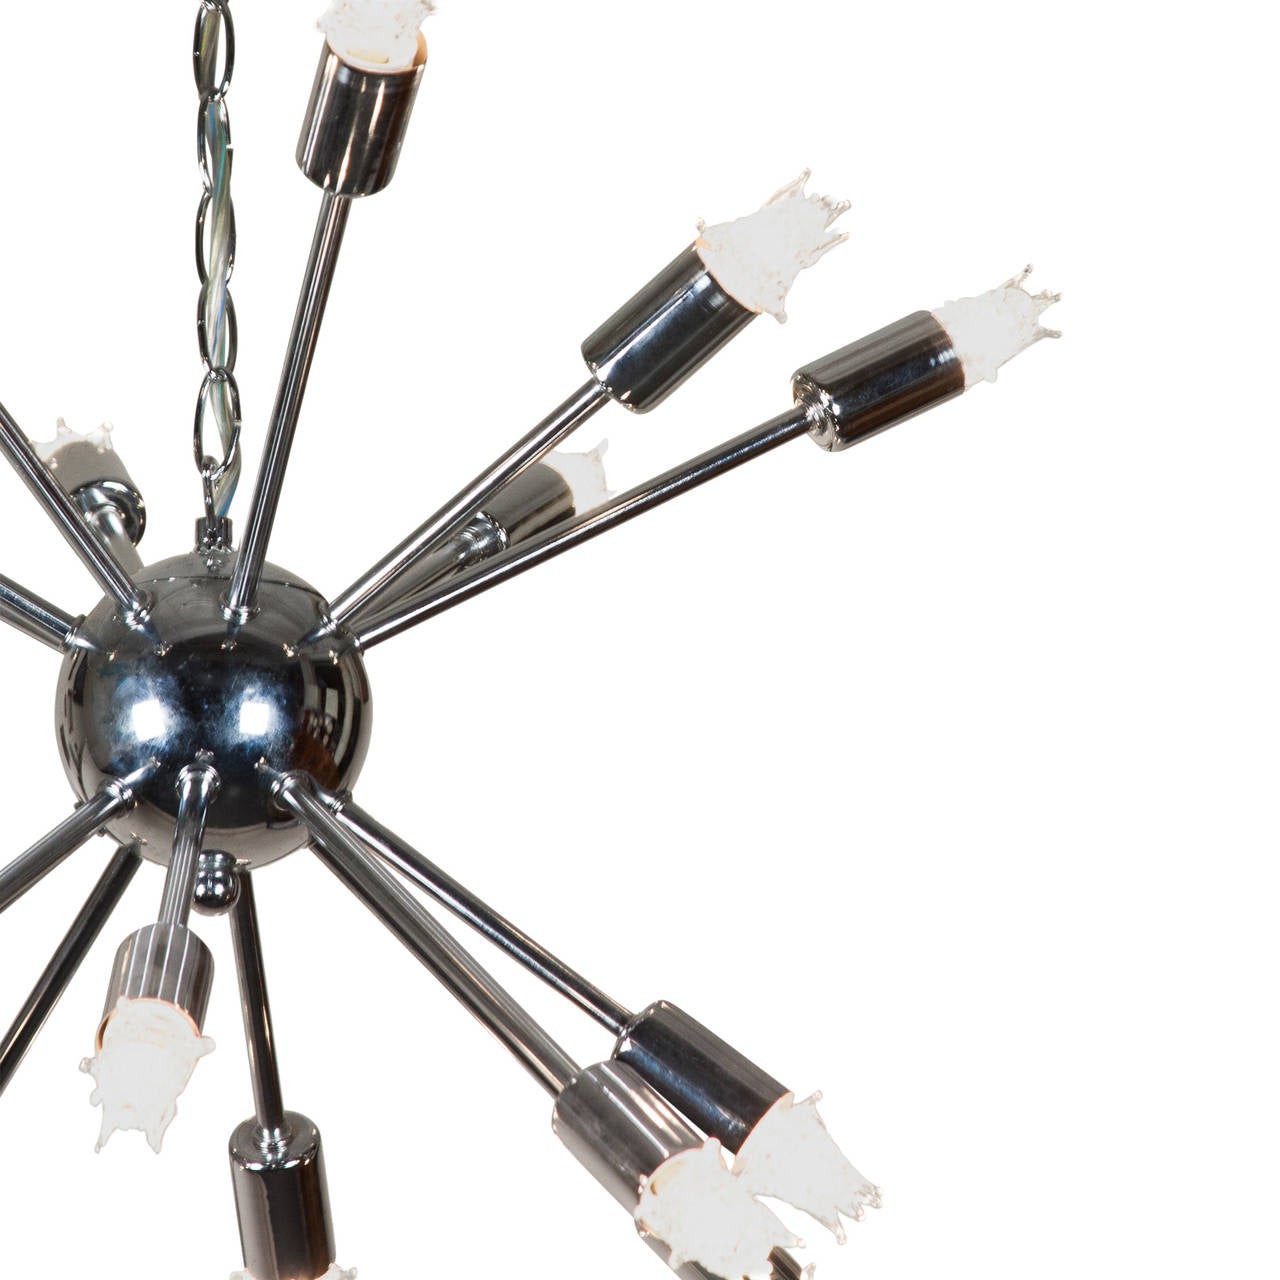 Sixteen-arm chrome Sputnik chandelier, the arms emanating in all directions from a center sphere. With chrome circular ceiling canopy, Italian, 1960s. Diameter 21 in, height of fixture only 20 in. Overall height is adjustable by modifying chain